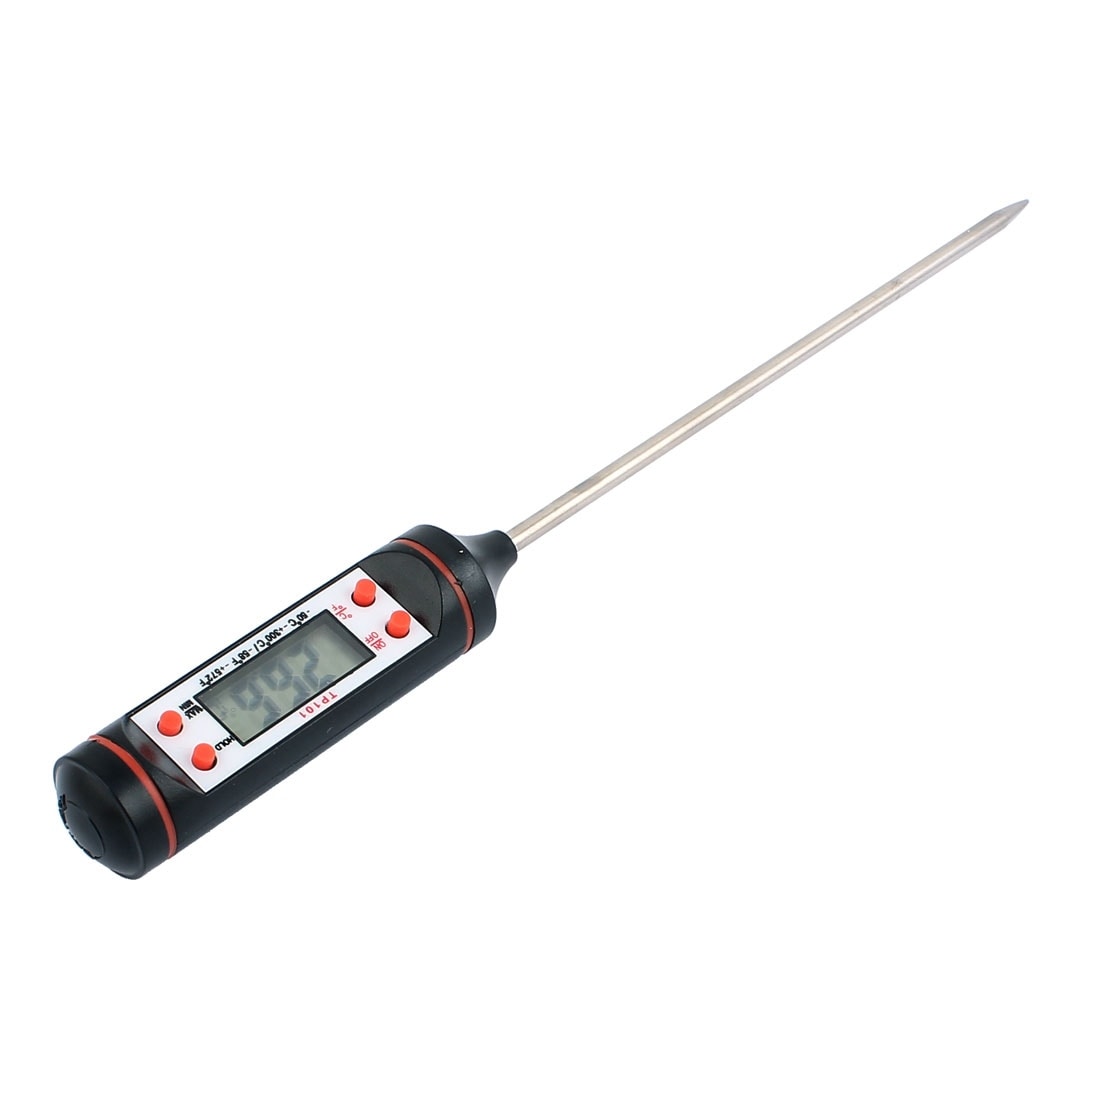 https://ak1.ostkcdn.com/images/products/is/images/direct/6c5aebdcaeaad137d7070b9954e1559de20aef28/Digital-Probe-Thermometer-Food-Temperature-Sensor-for-Cooking-Baking-Meat.jpg